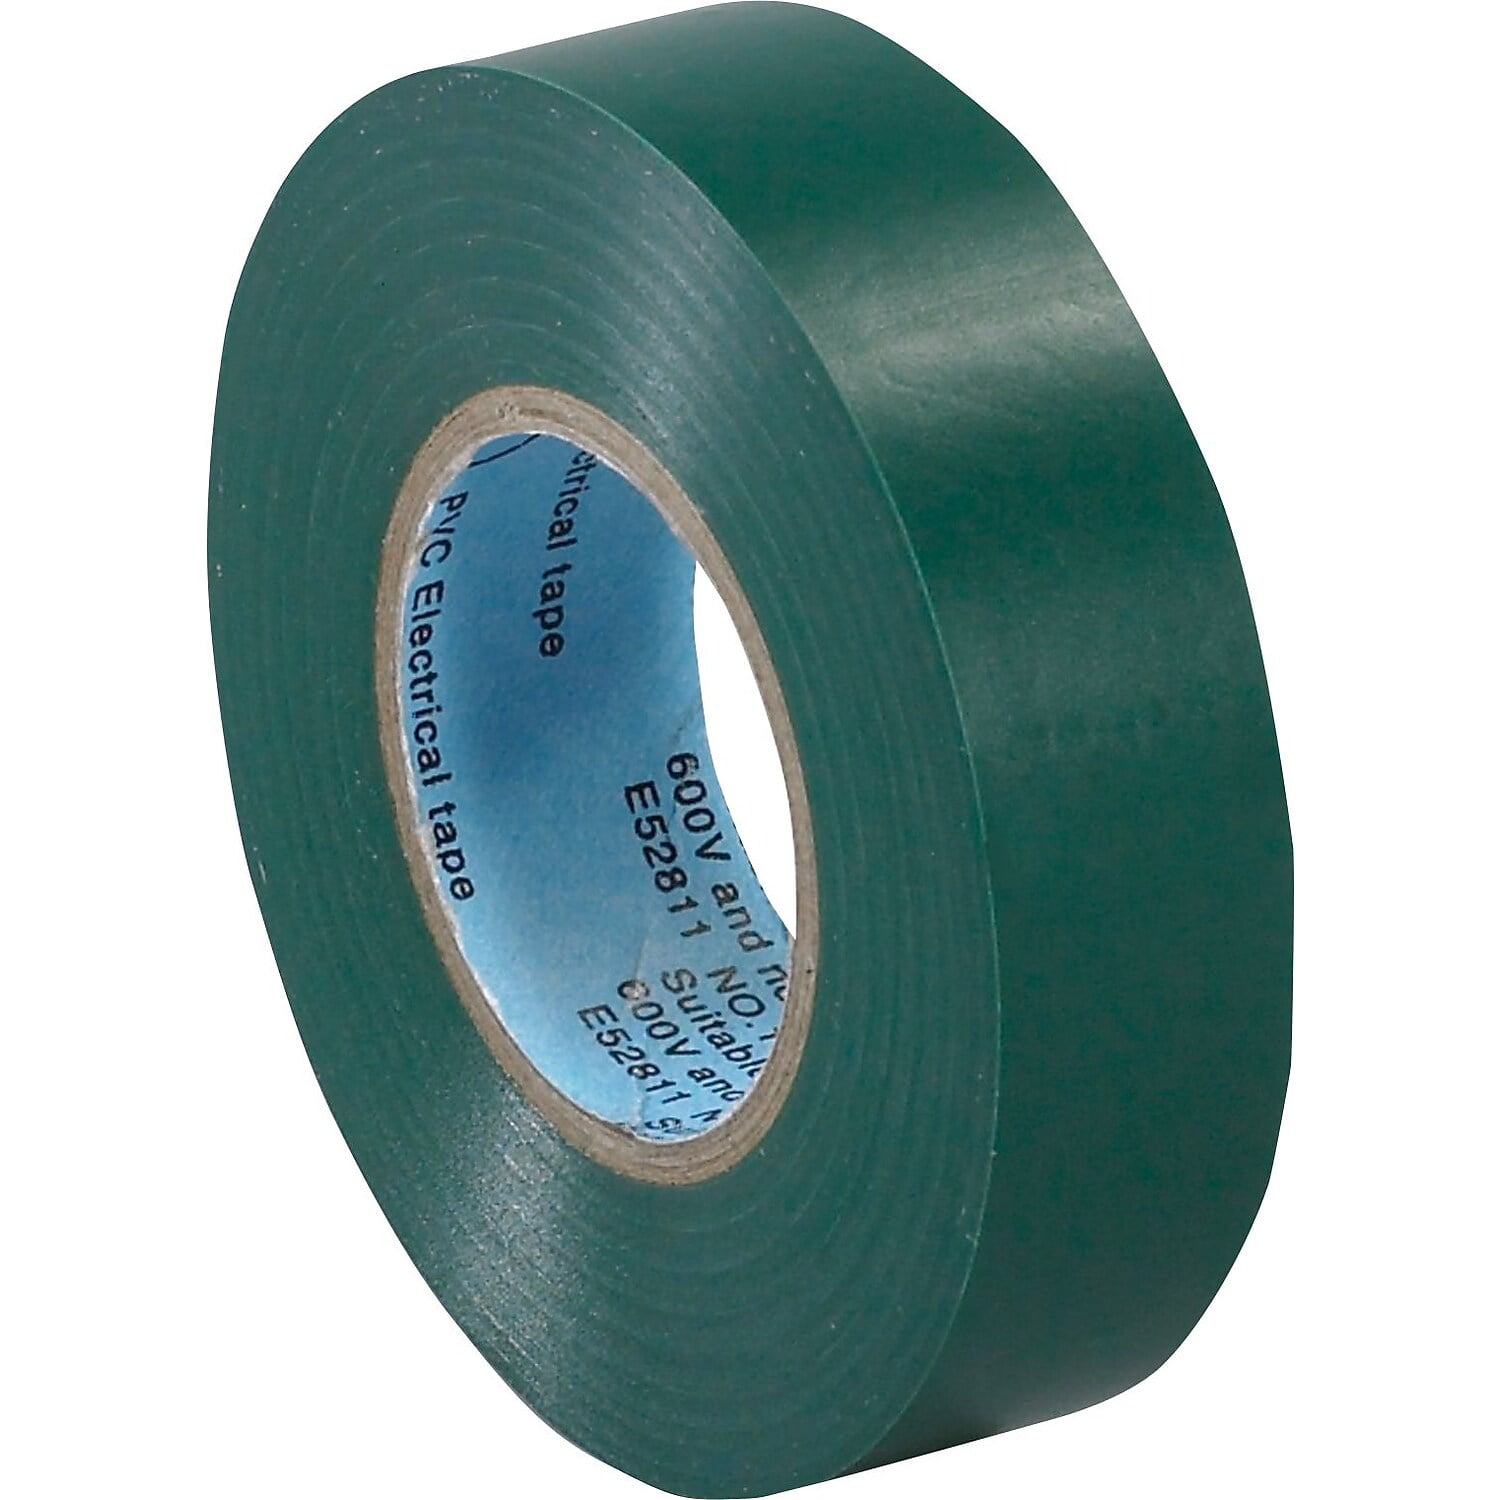 T96461810pkg 0.75 In. X 20 Yards Green Electrical Tape - Pack Of 10